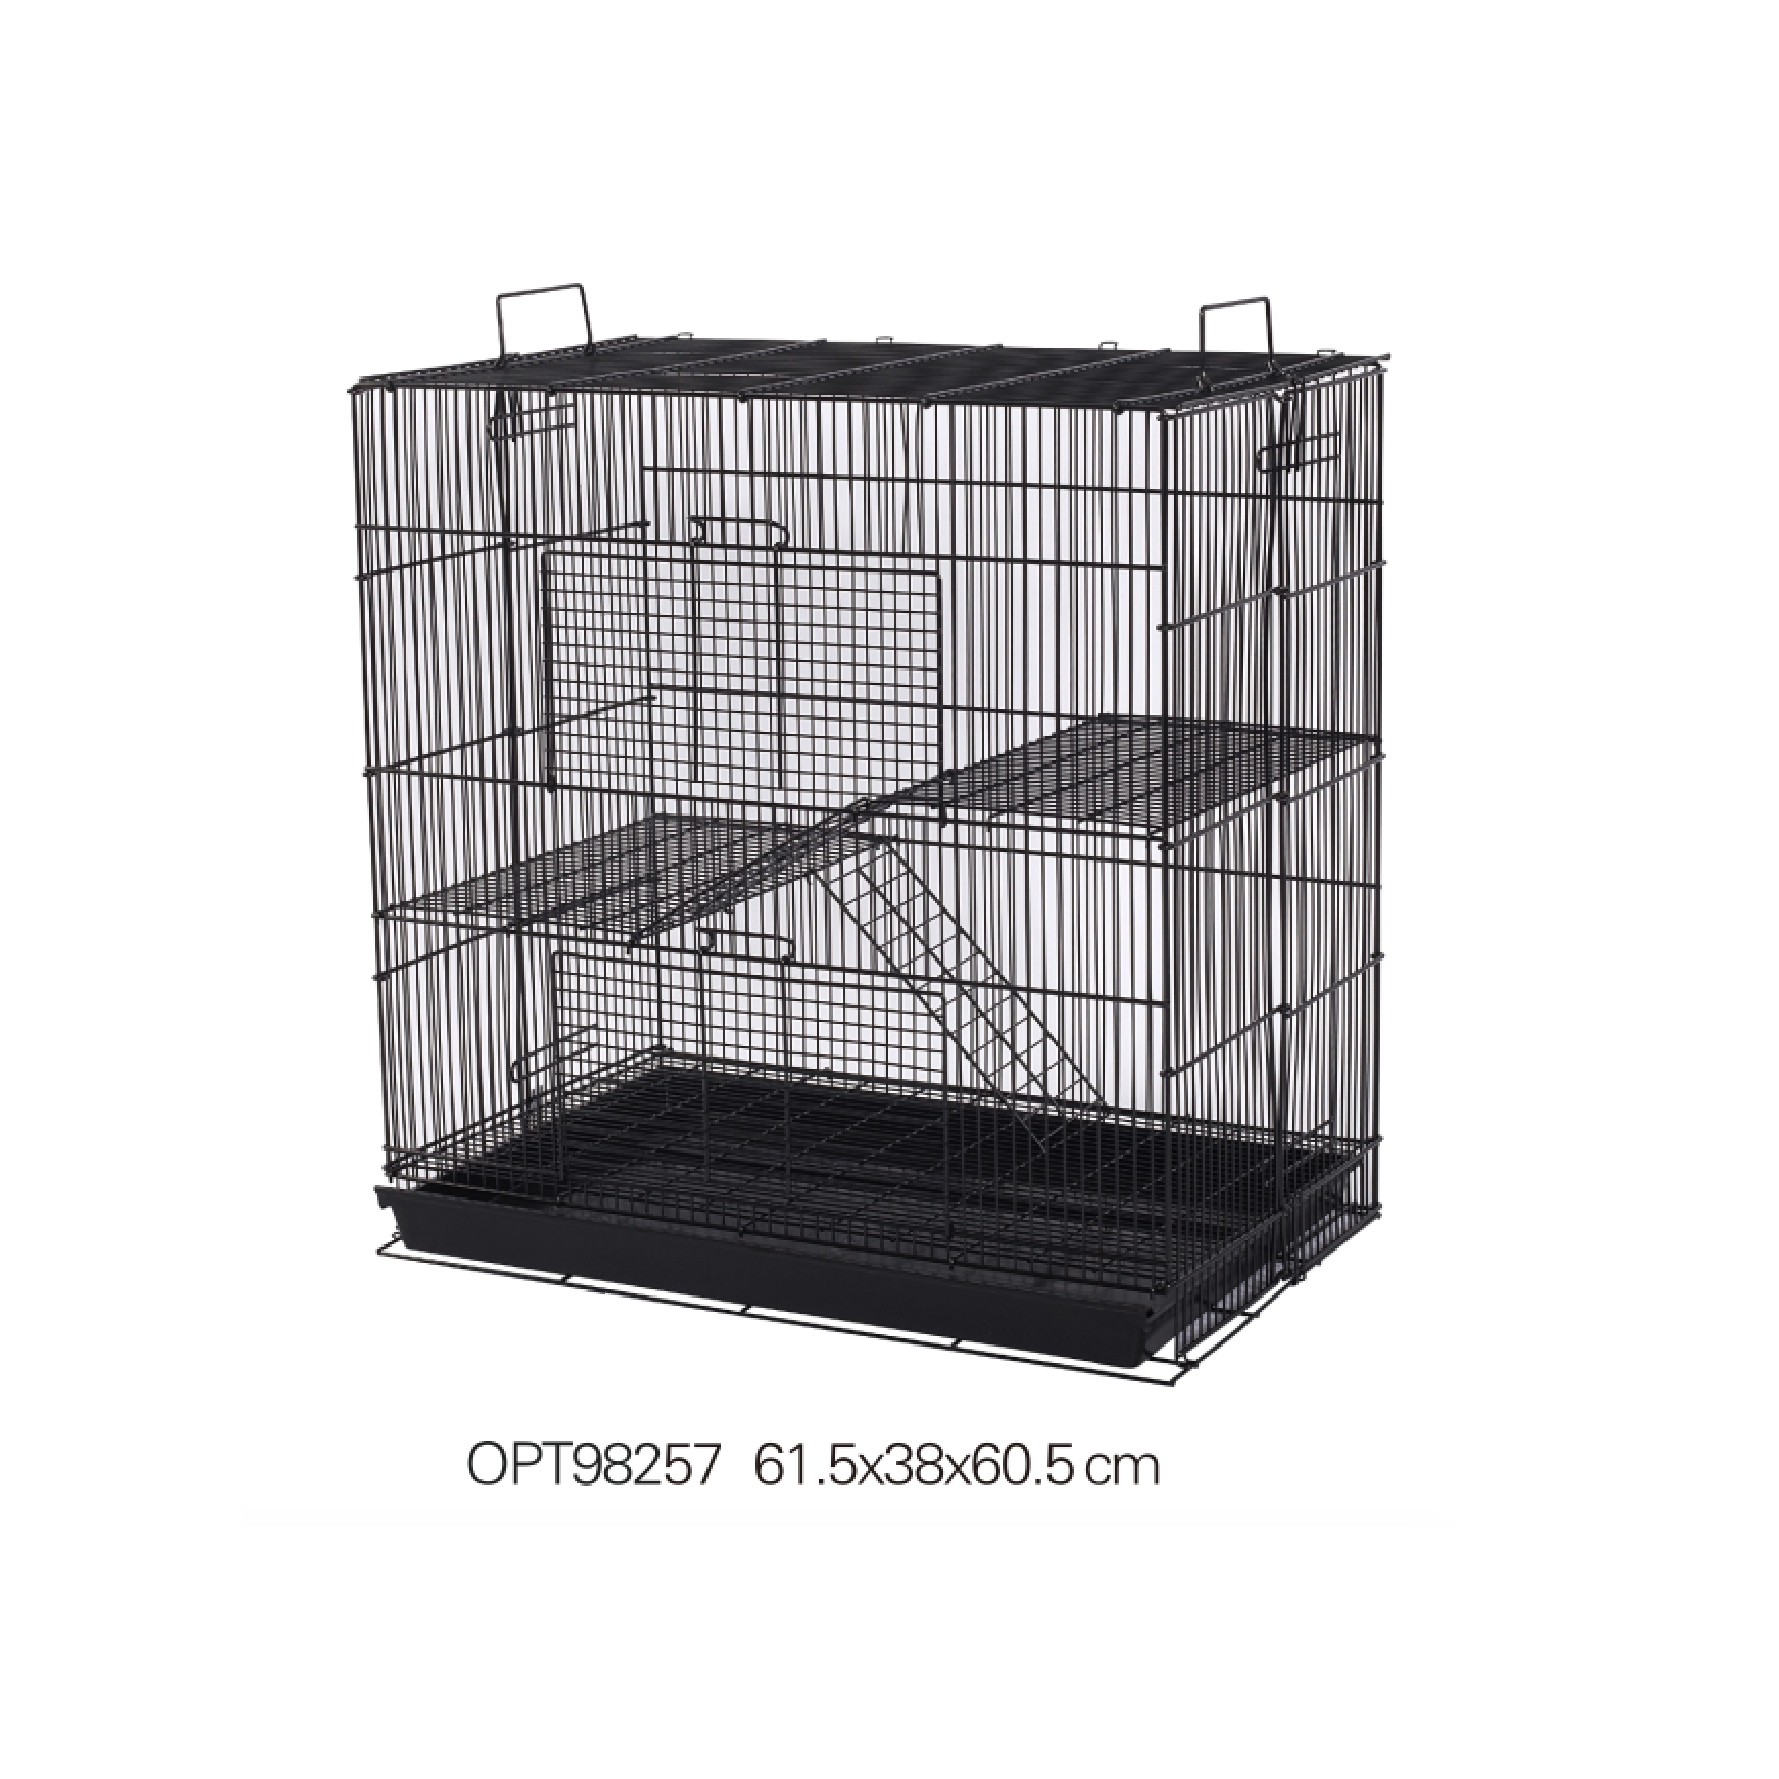 Rabbit cages OPT98257